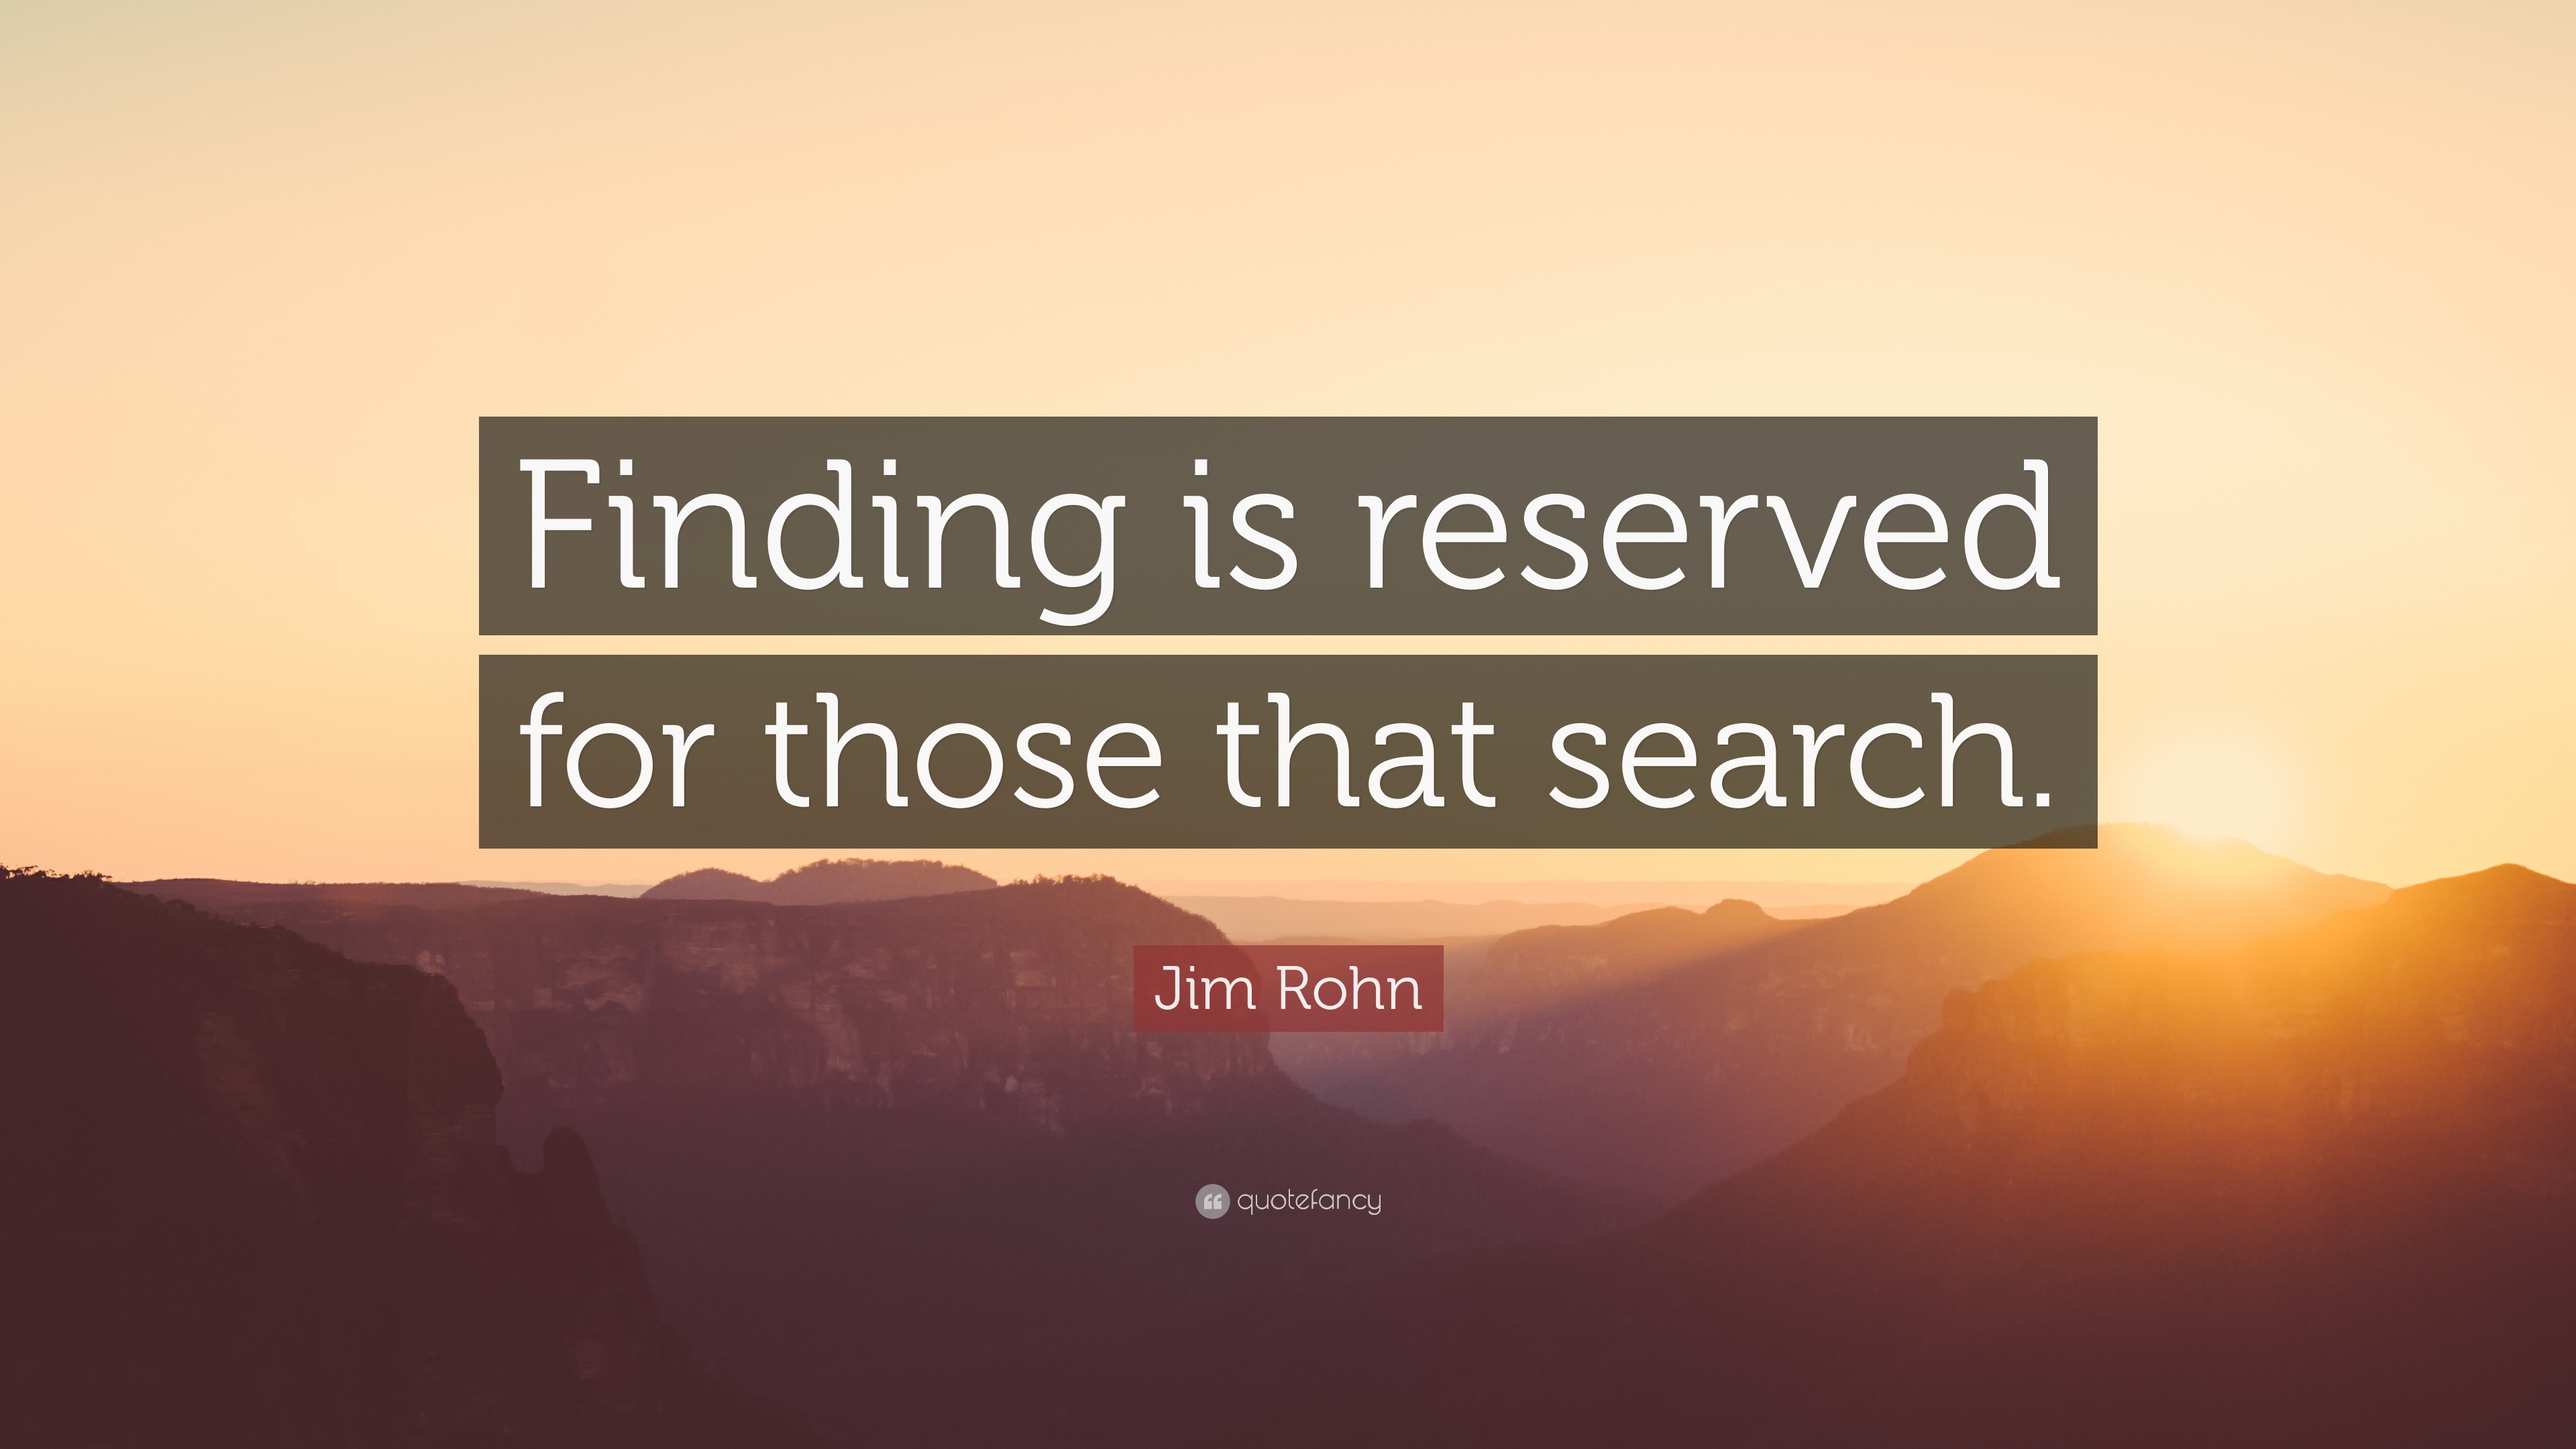 Jim Rohn Quote “Finding is reserved for those that search